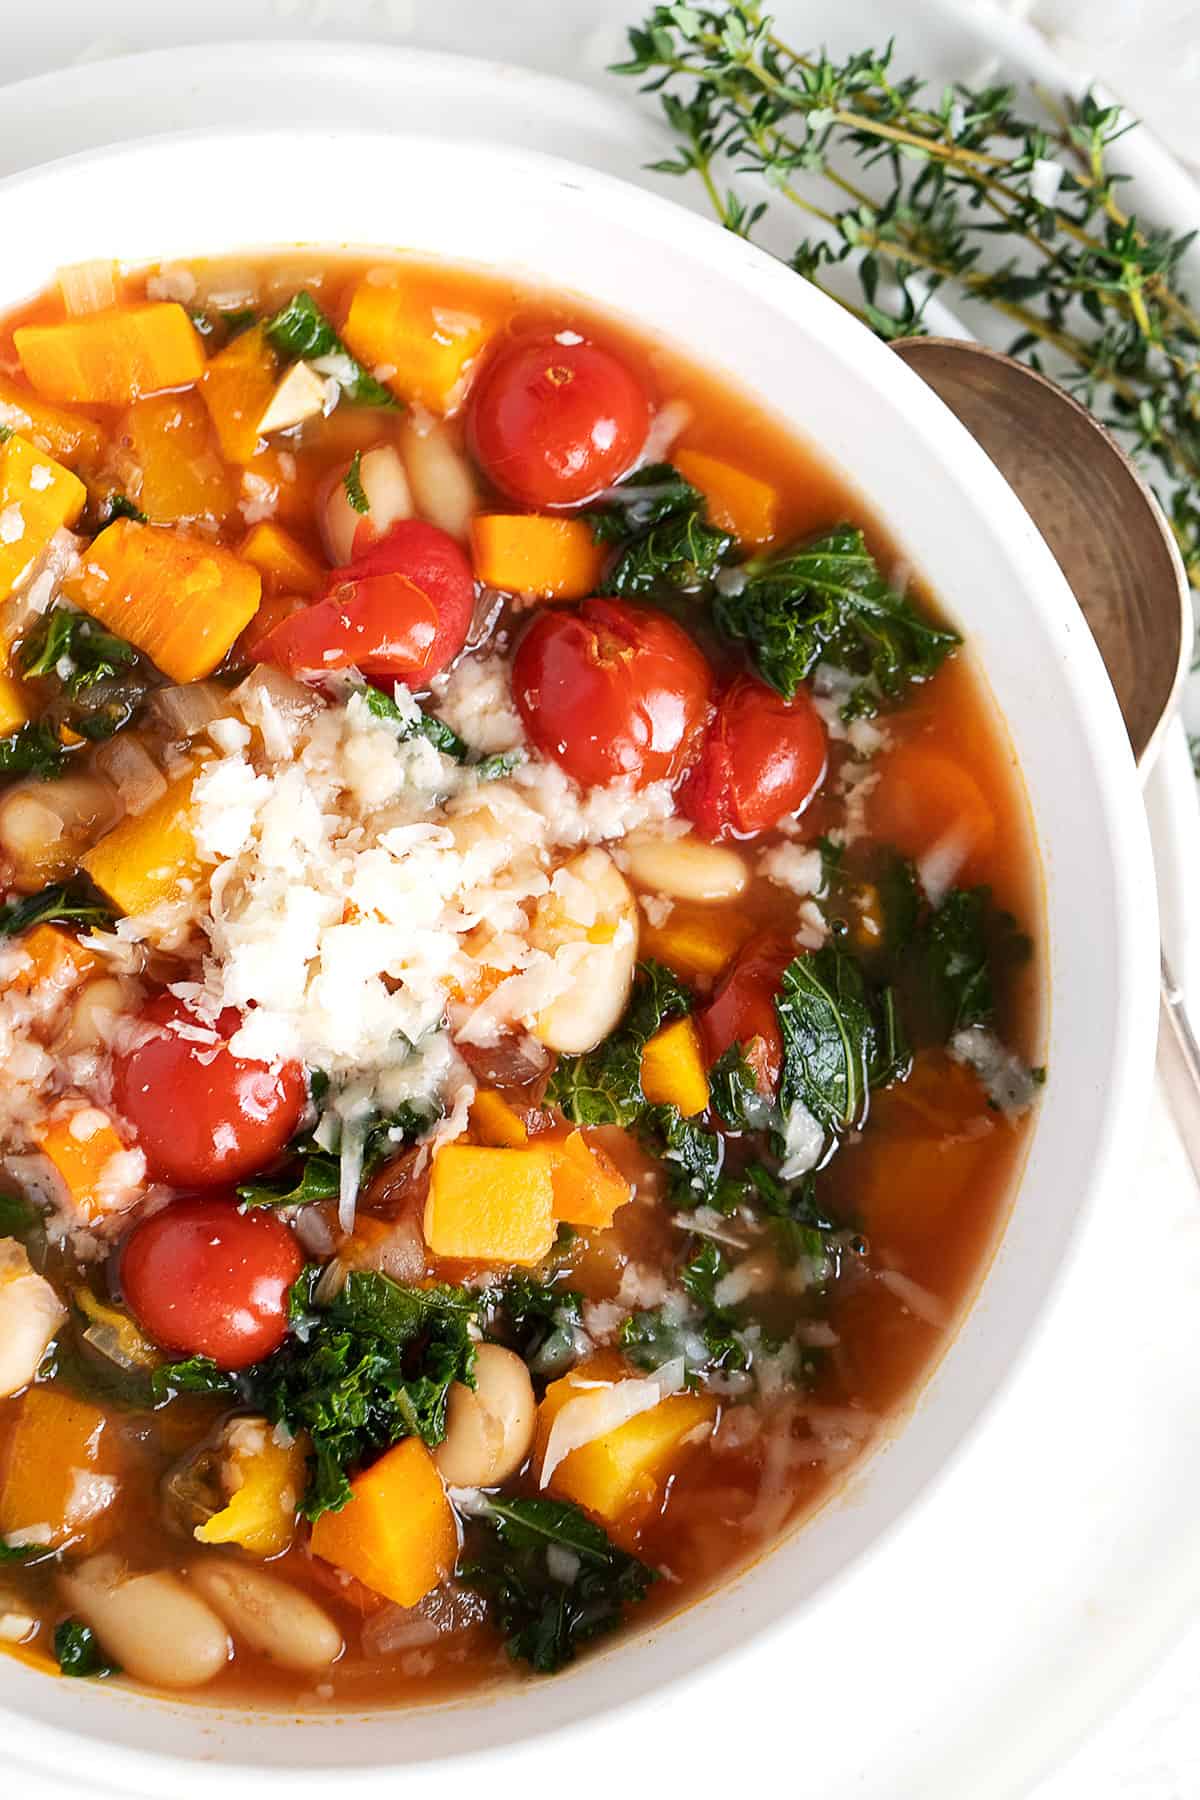 Seven reasons why soup season should be every season in Ontario